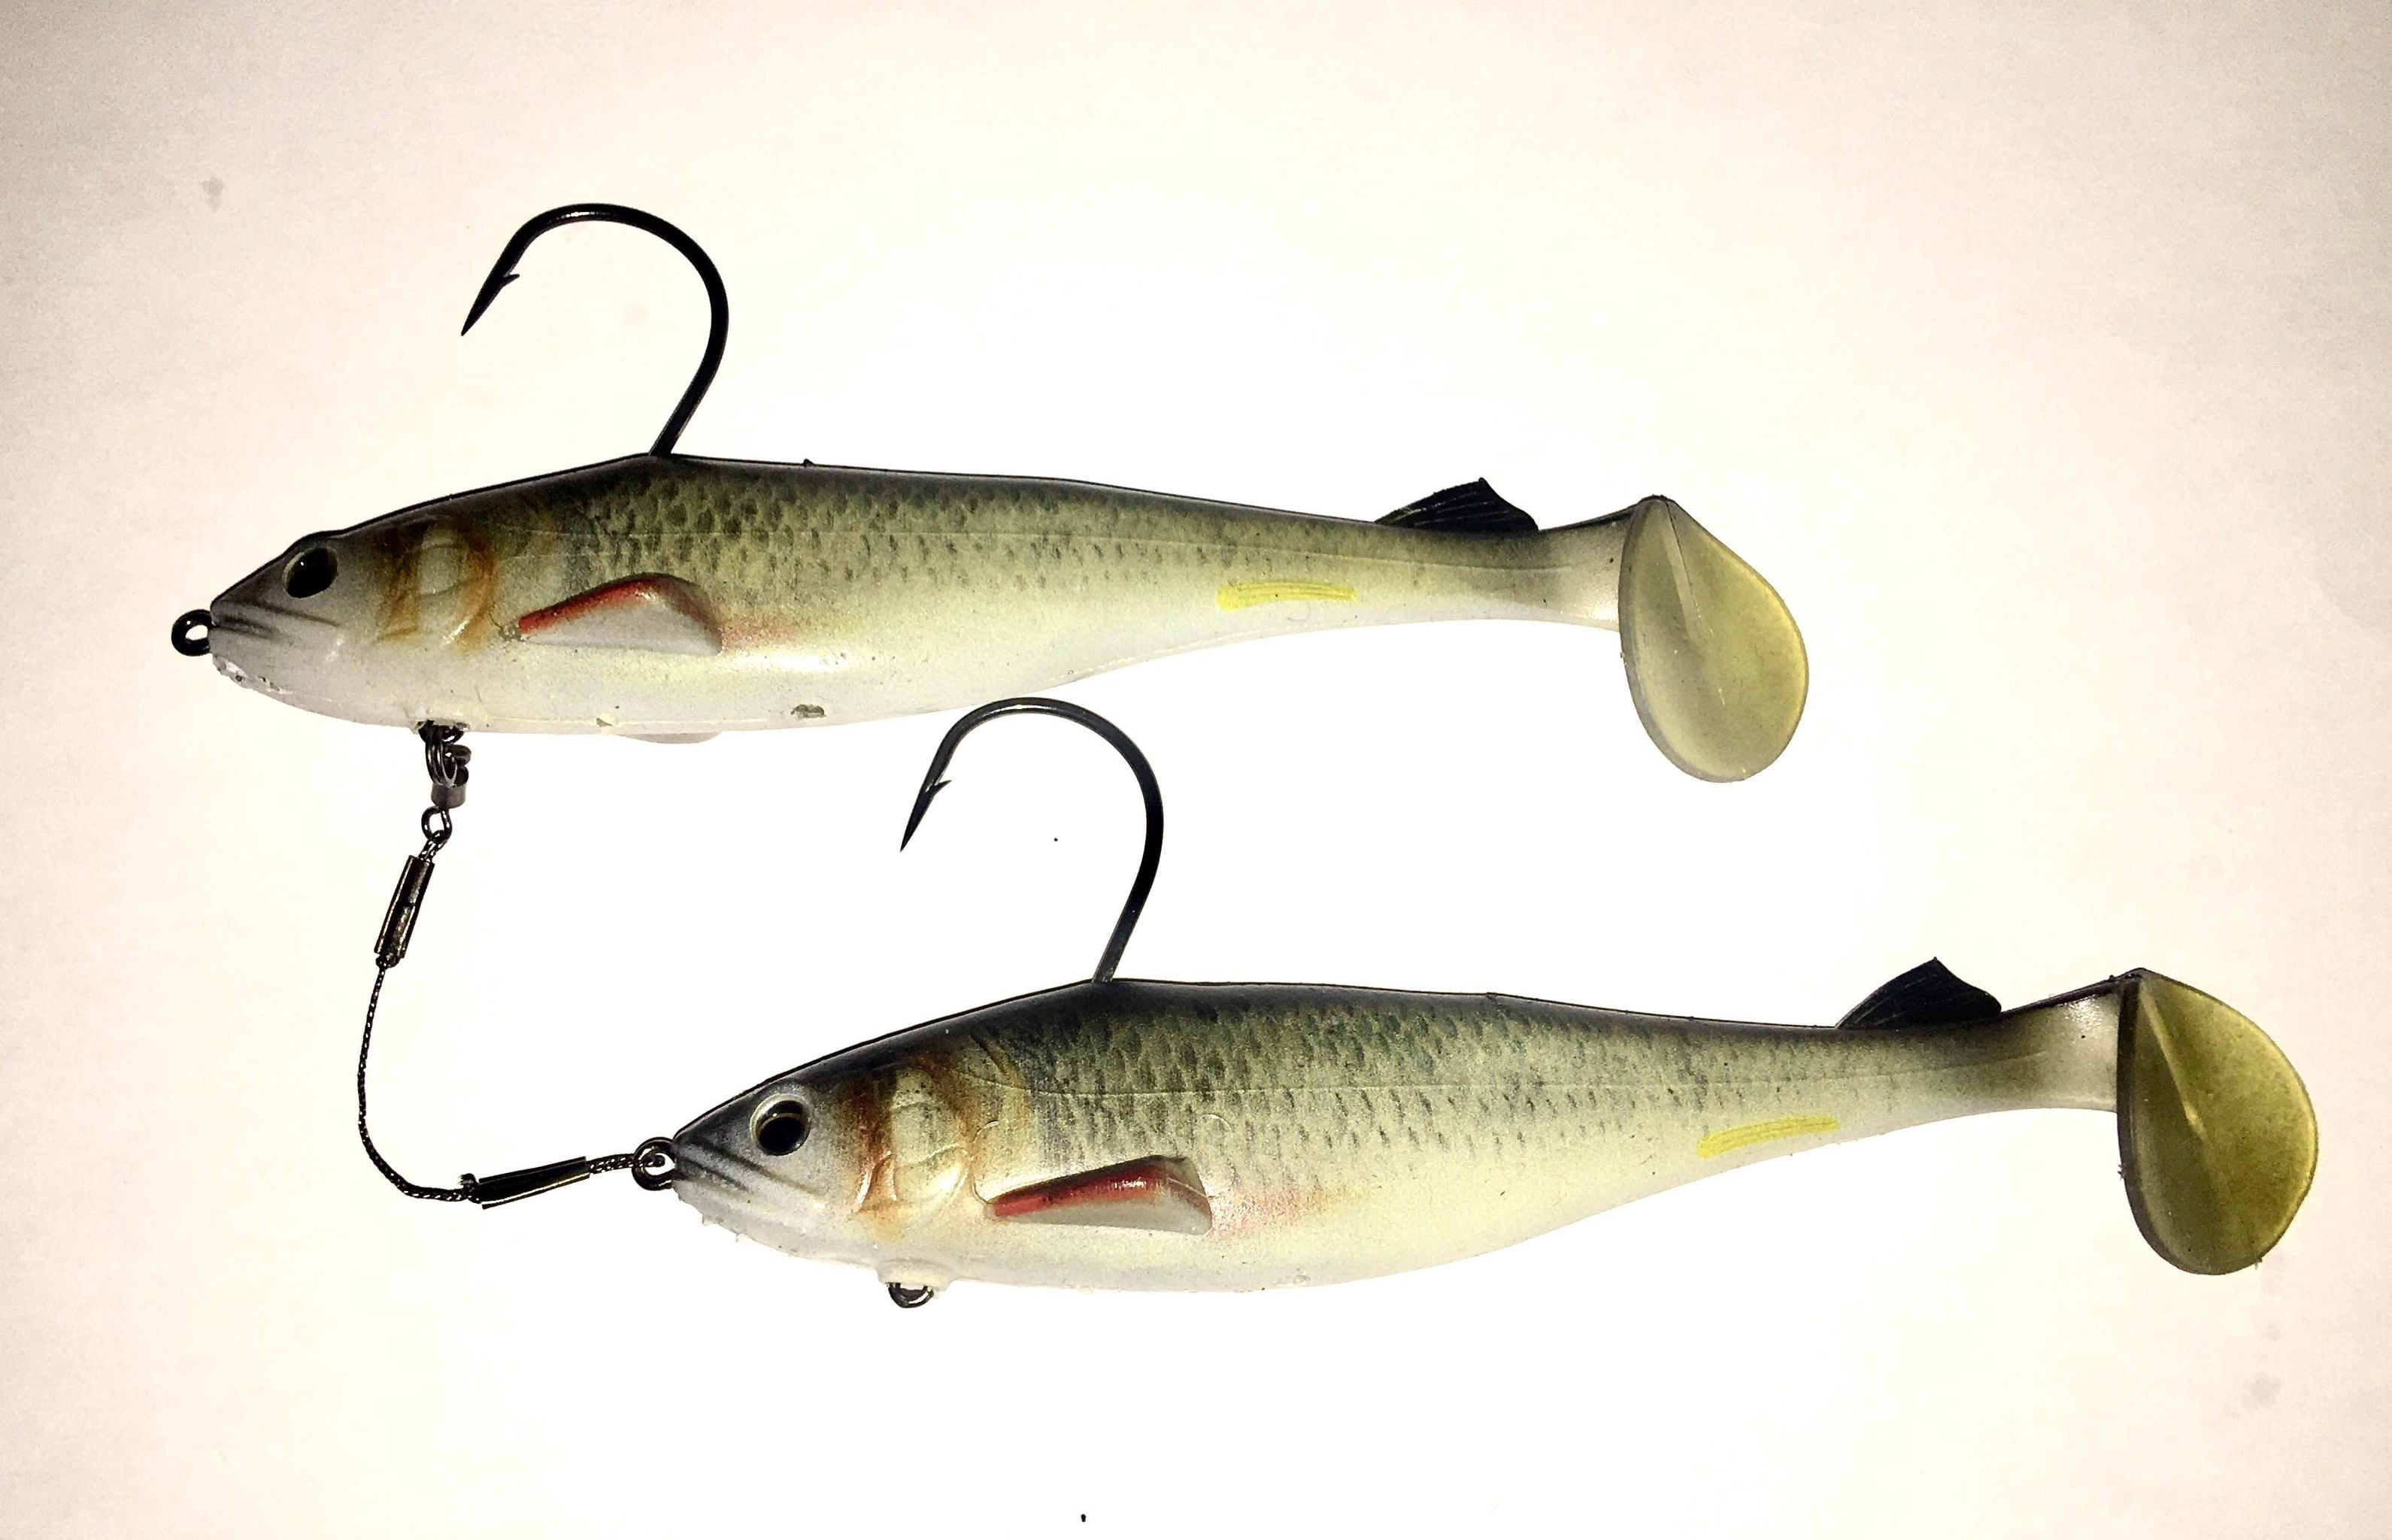 Imakatsu Stealth Swimmer, The “Double Deal” Rig – Bait Tuning and